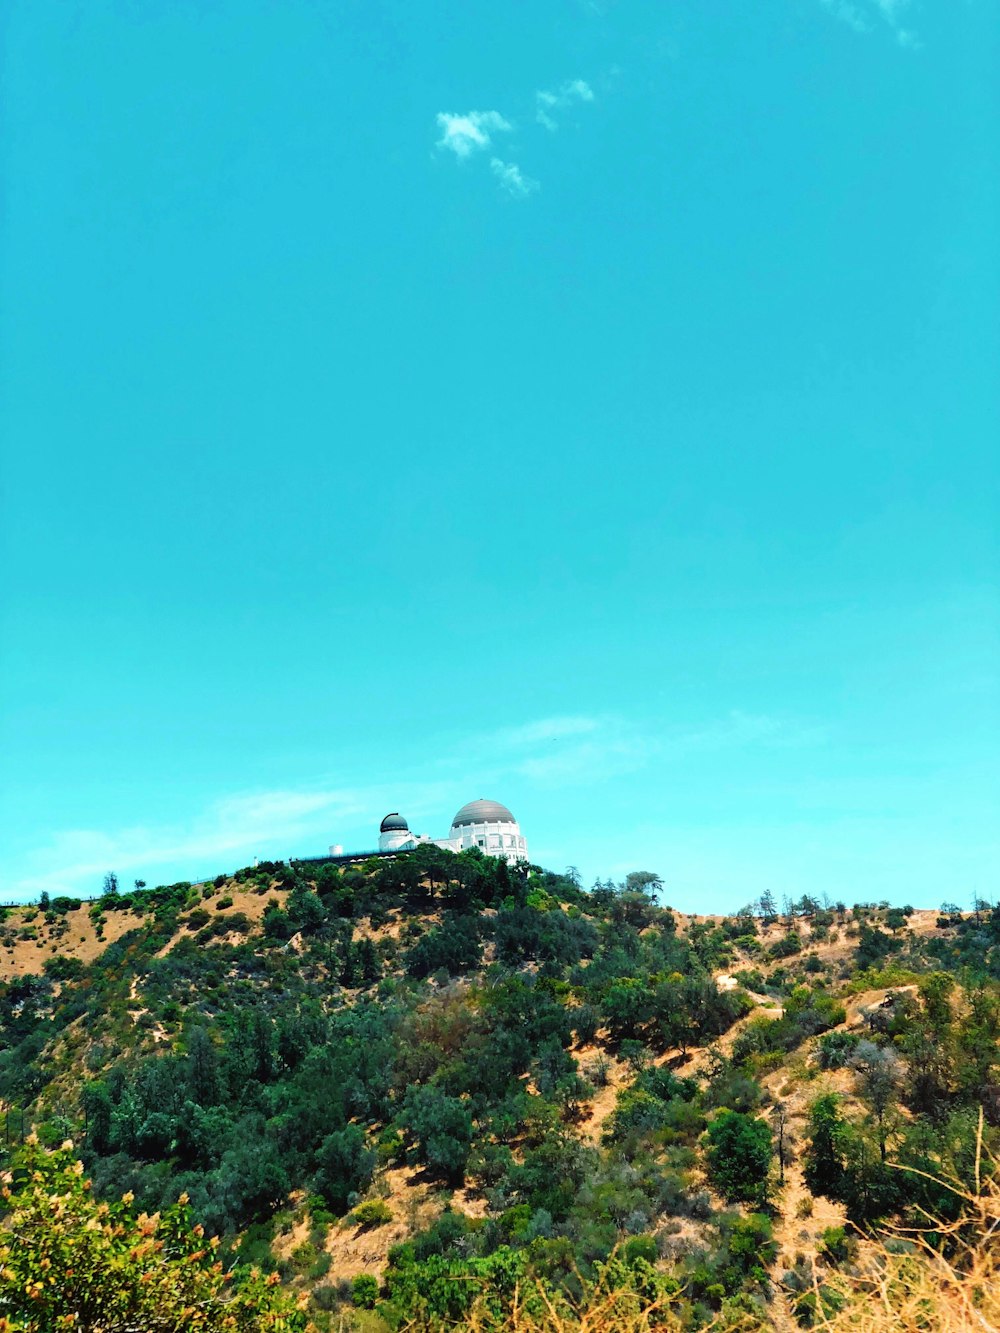 white dome building on top of hill under blue sky during daytime